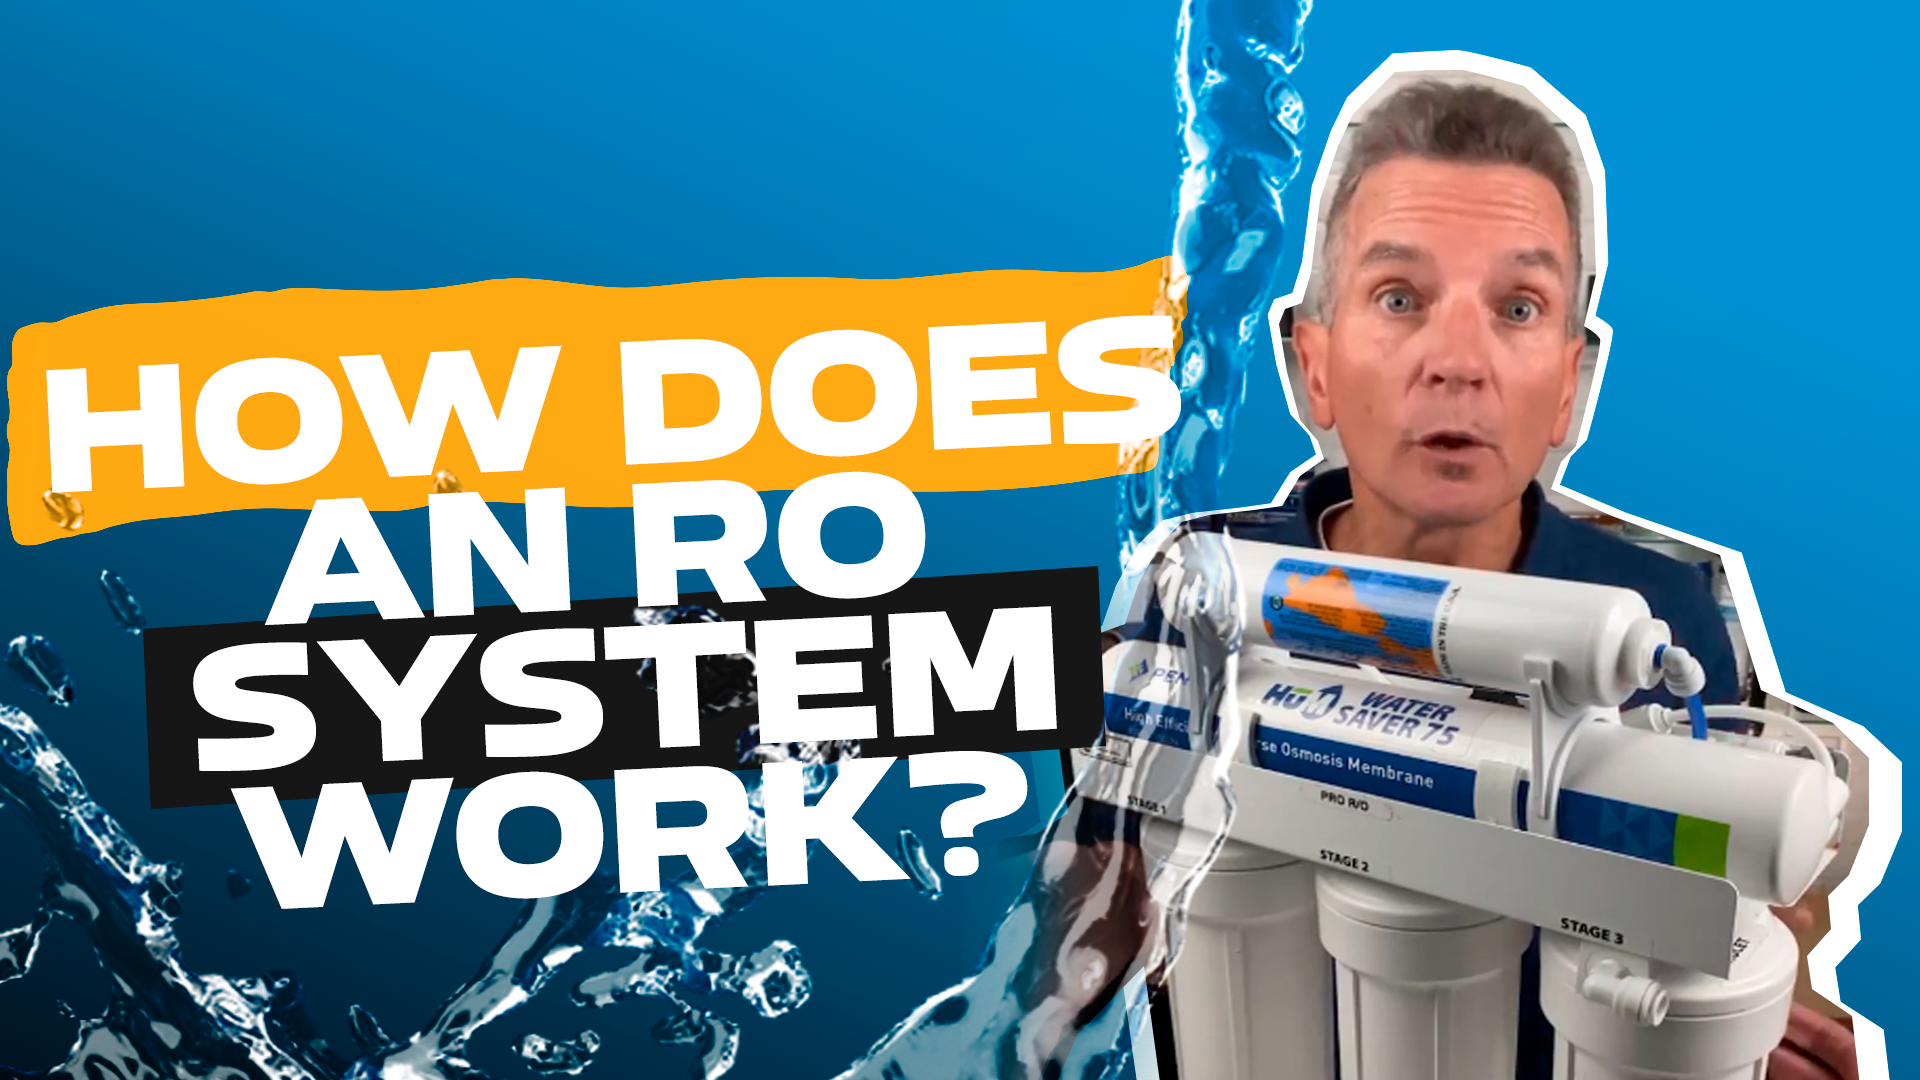 How Does an RO System Work?